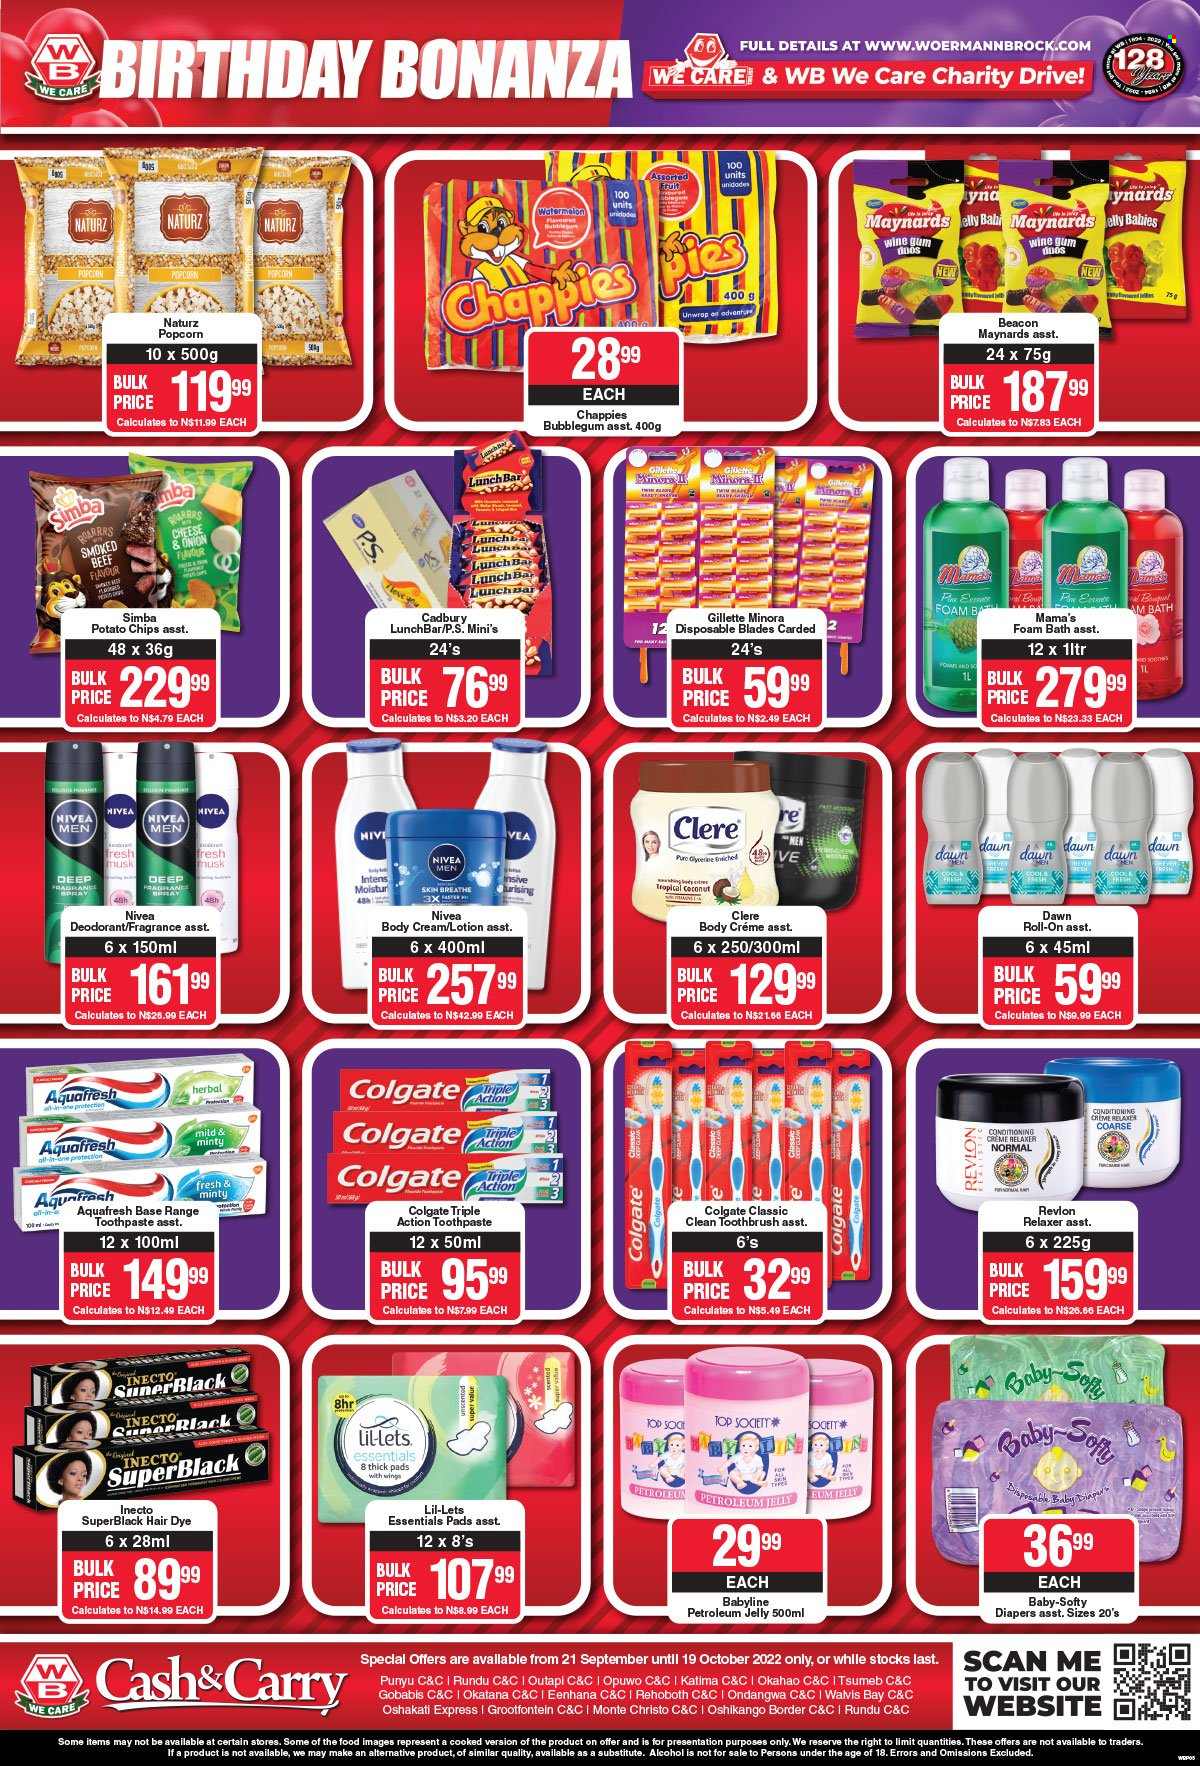 thumbnail - Woermann Brock catalogue  - 21/09/2022 - 19/10/2022 - Sales products - Mama's, bubblegum, Cadbury, potato chips, chips, Simba, popcorn, wine, alcohol, nappies, Nivea, bath foam, Colgate, toothbrush, toothpaste, Lil-lets, petroleum jelly, Revlon, relaxer, body lotion, Clere, Top Society, anti-perspirant, fragrance, roll-on, deodorant, Gillette. Page 5.